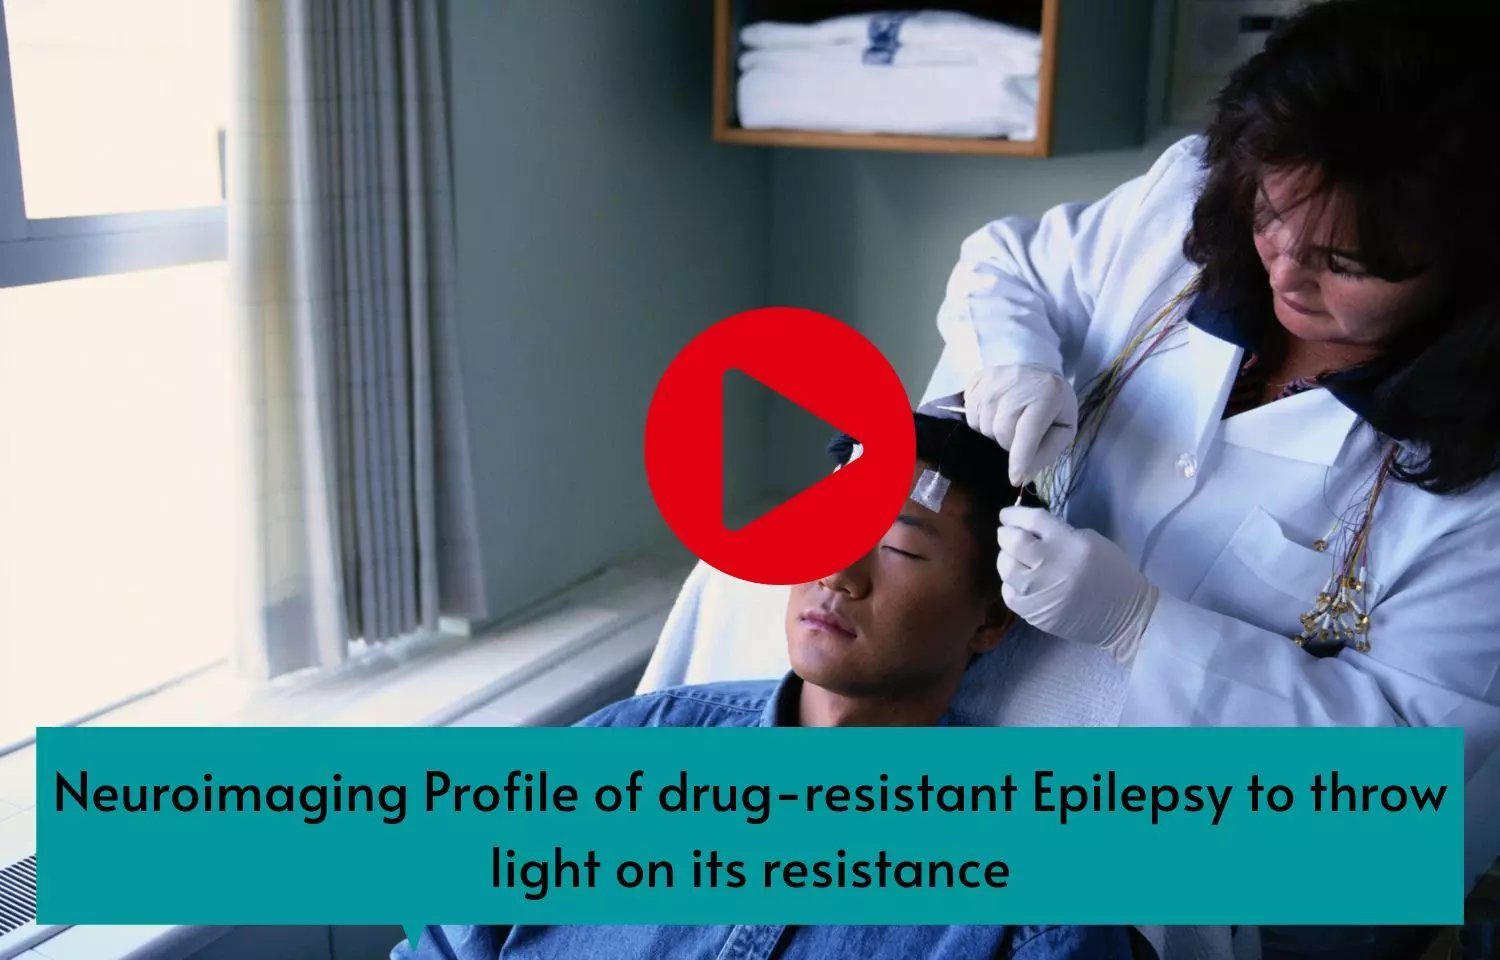 Neuroimaging Profile of drug-resistant Epilepsy to throw light on its resistance